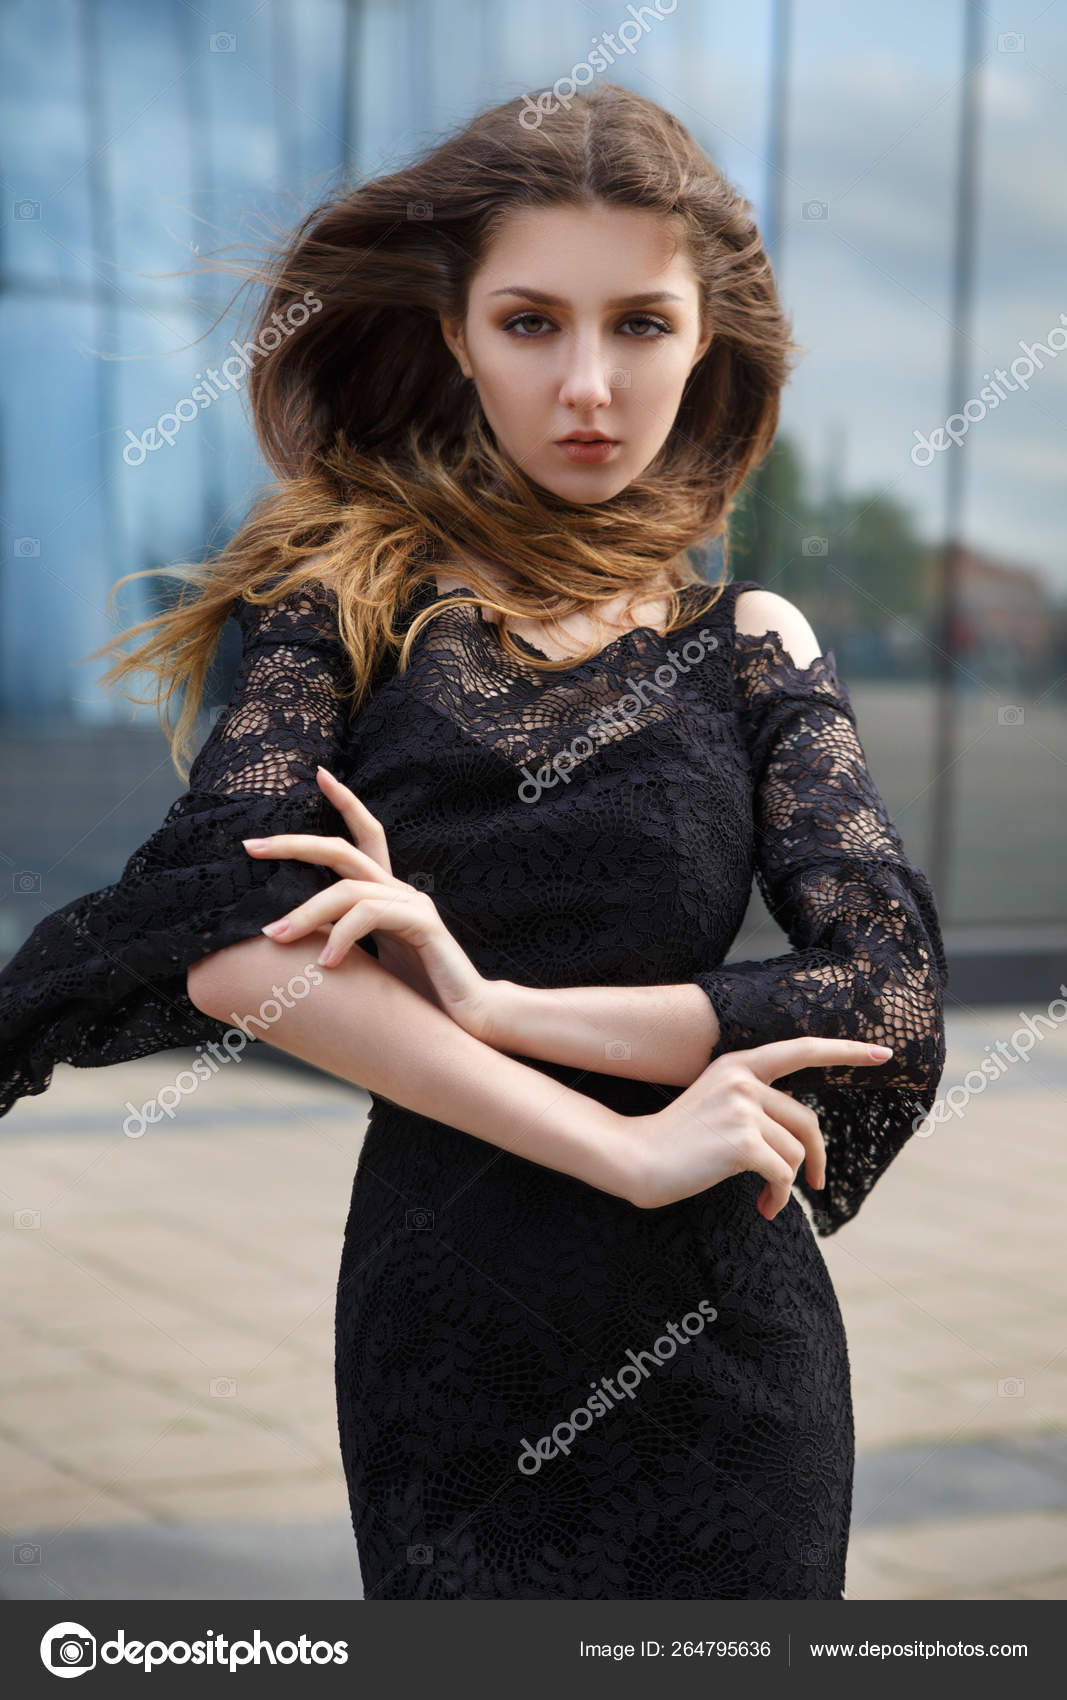 Cute Girl Image In Black Dress Discount, SAVE 38% - leadingasians.com